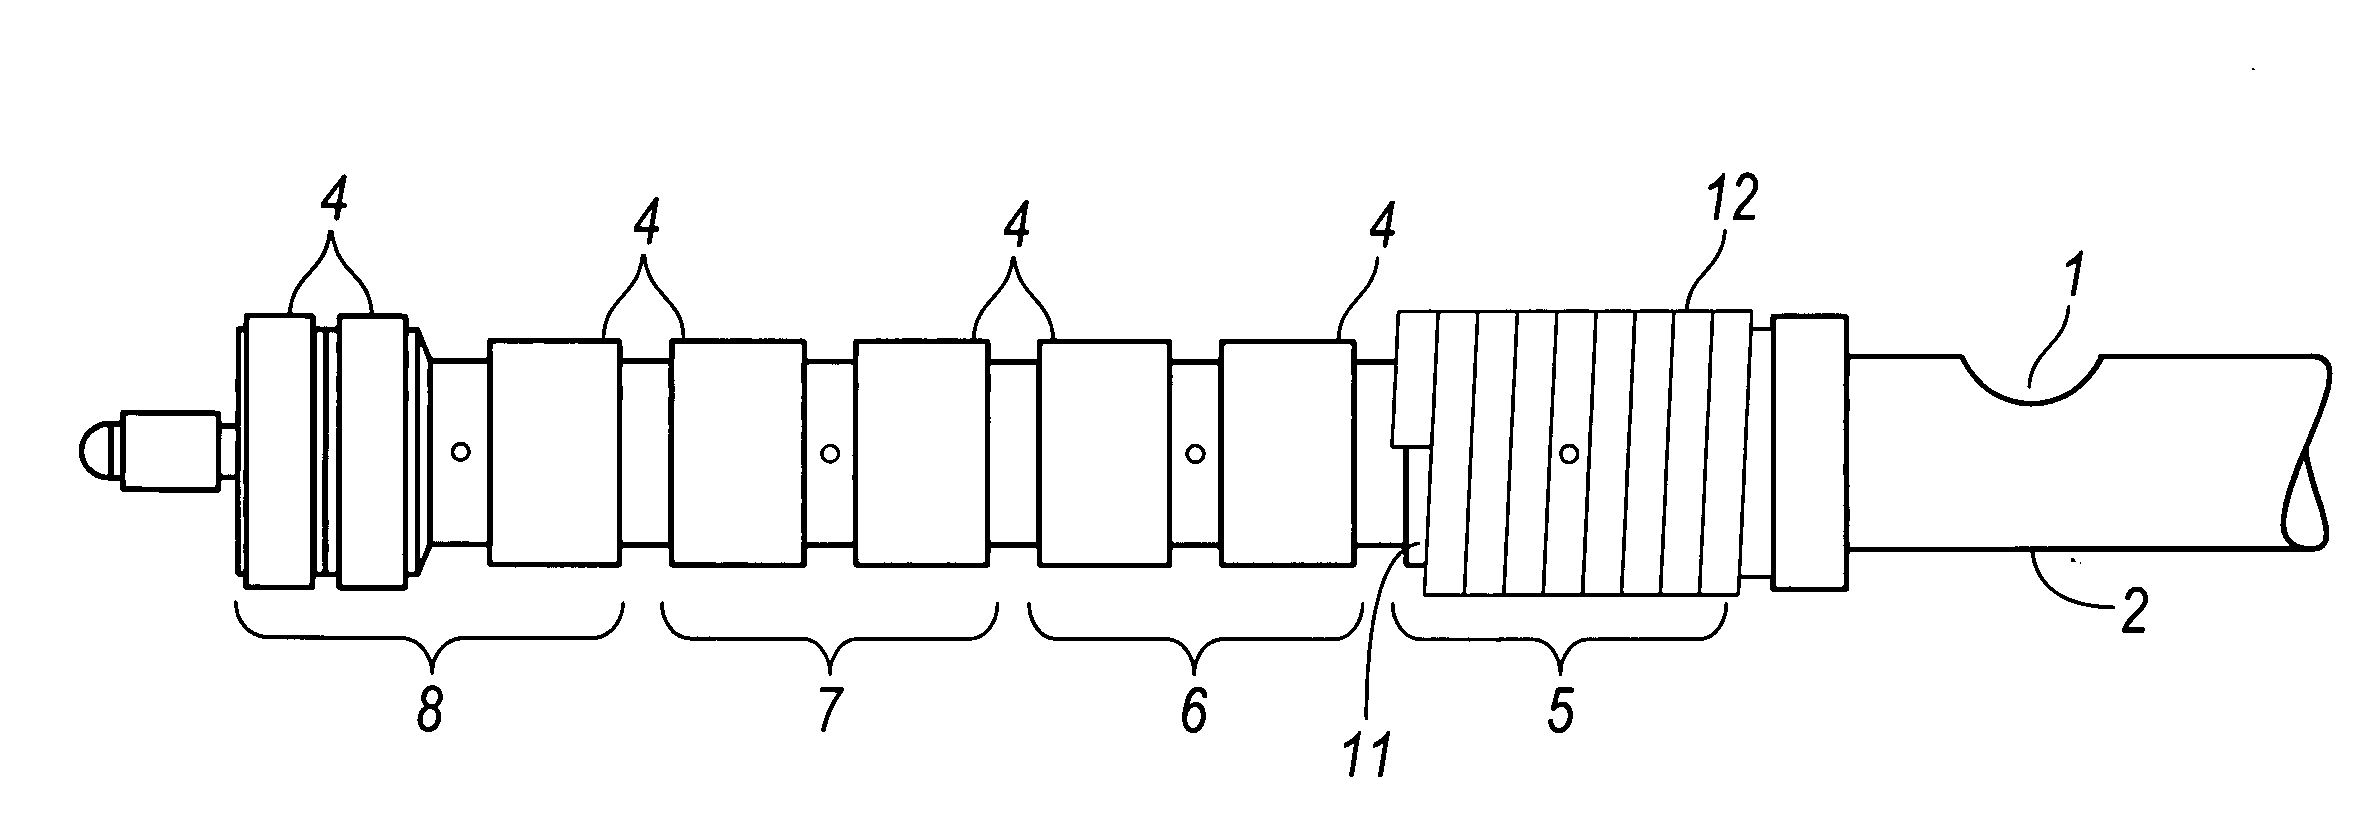 Heating system for plastic processing equipment having a profile gap